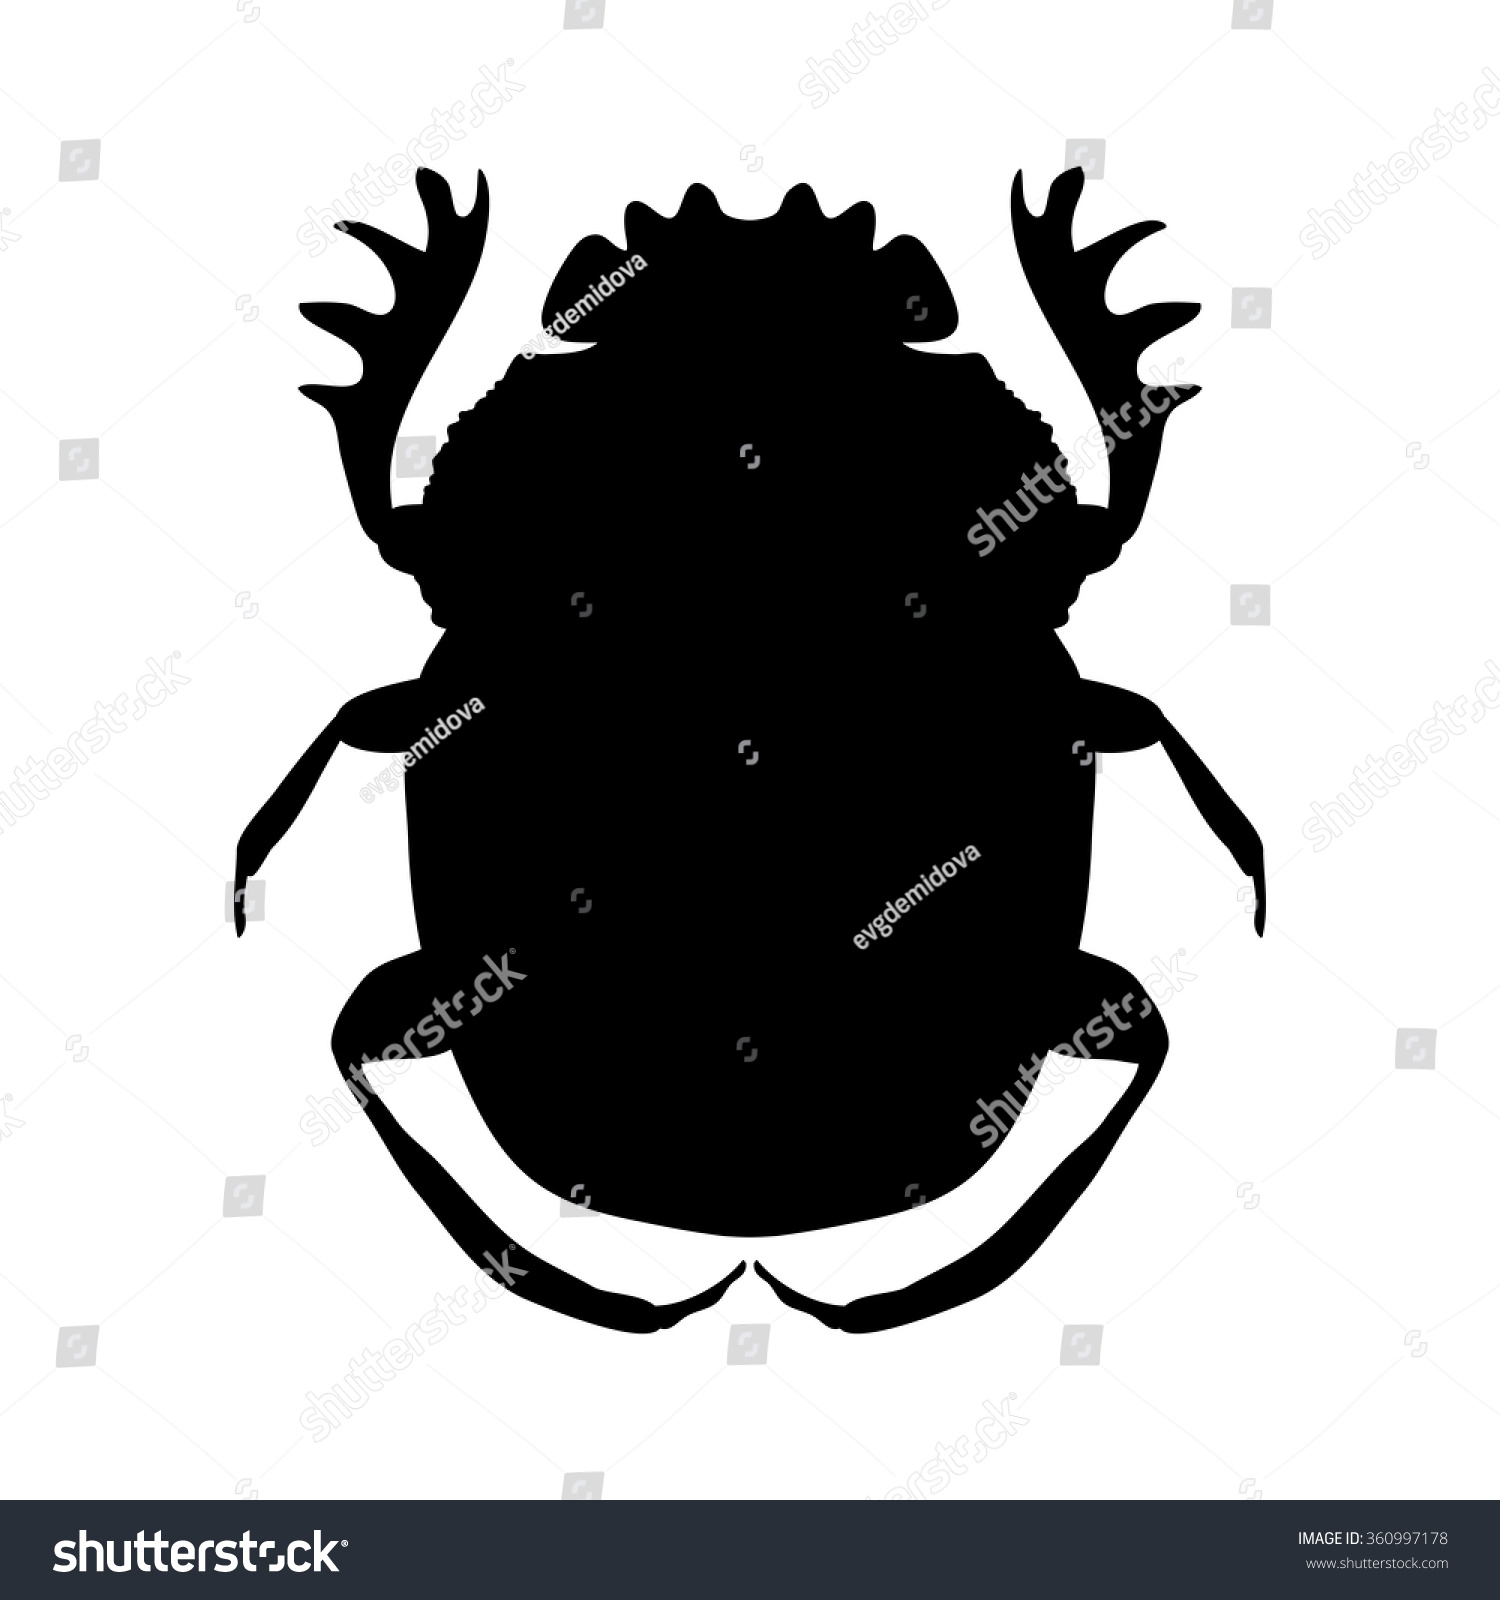 SVG of silhouette scarab. silhouette Geotrupidae dor-beetle .silhouette dor-beetle scarab isolated on white background.scarab, dor-beetle. Vector illustration svg